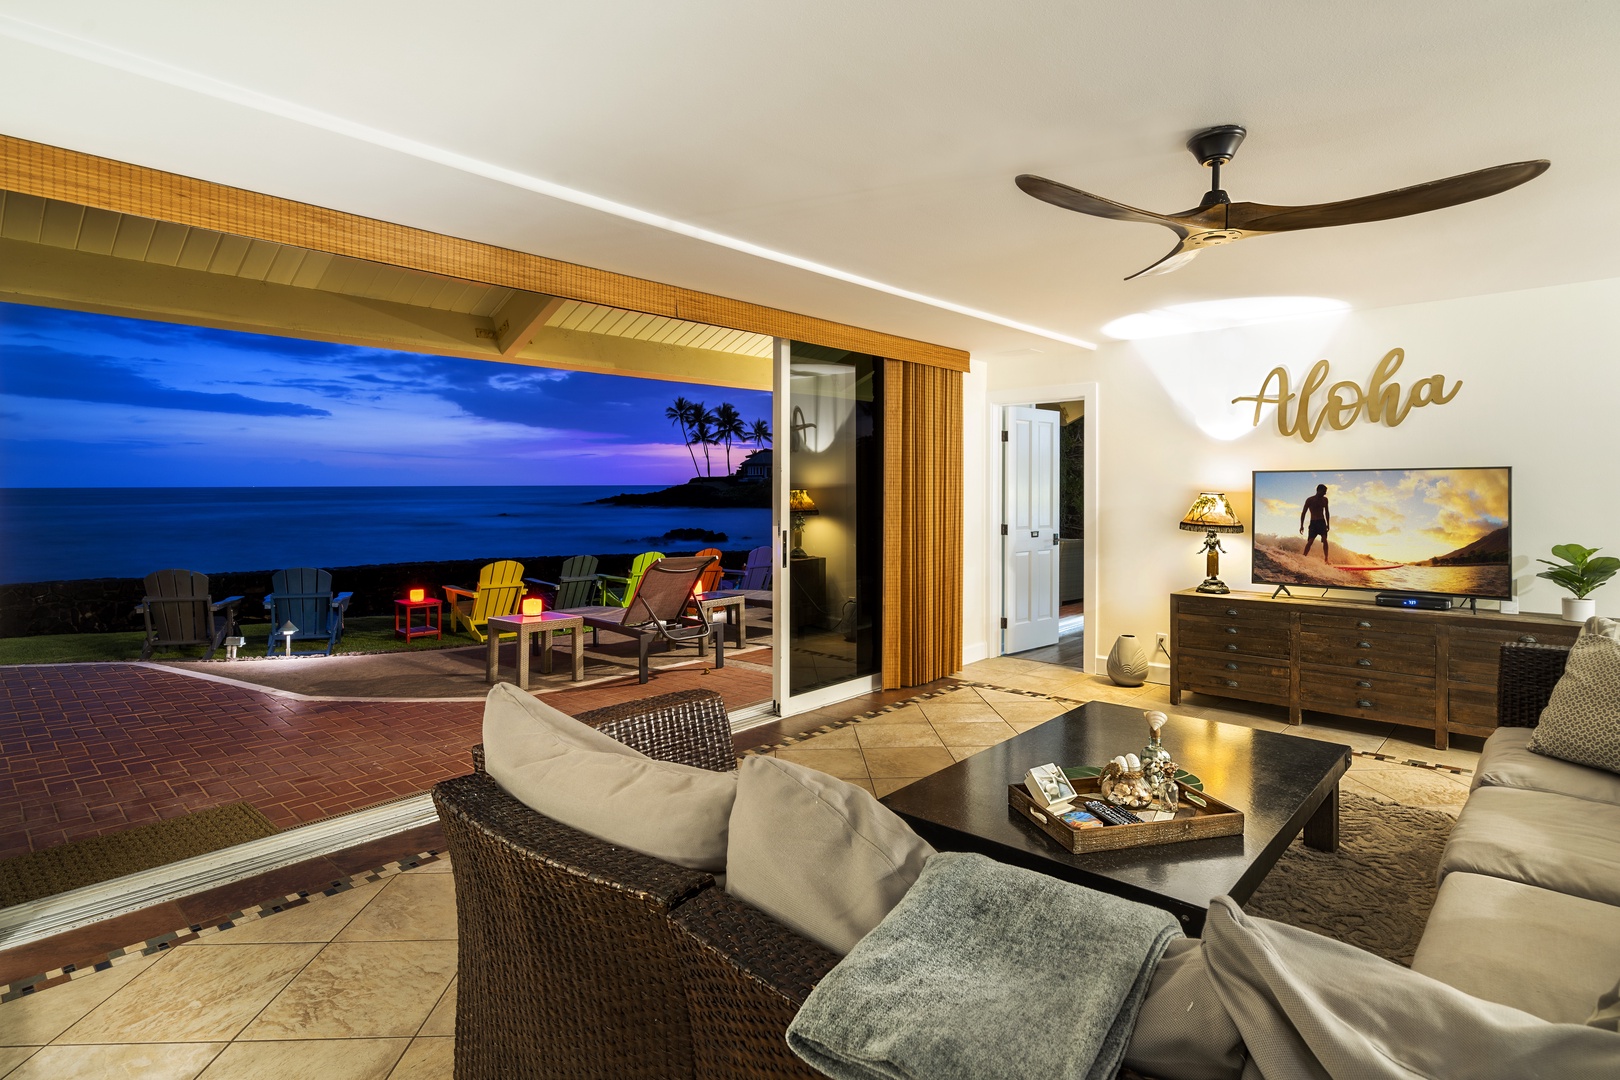 Kailua Kona Vacation Rentals, Hale Pua - Access from the living room to the yard and pool area